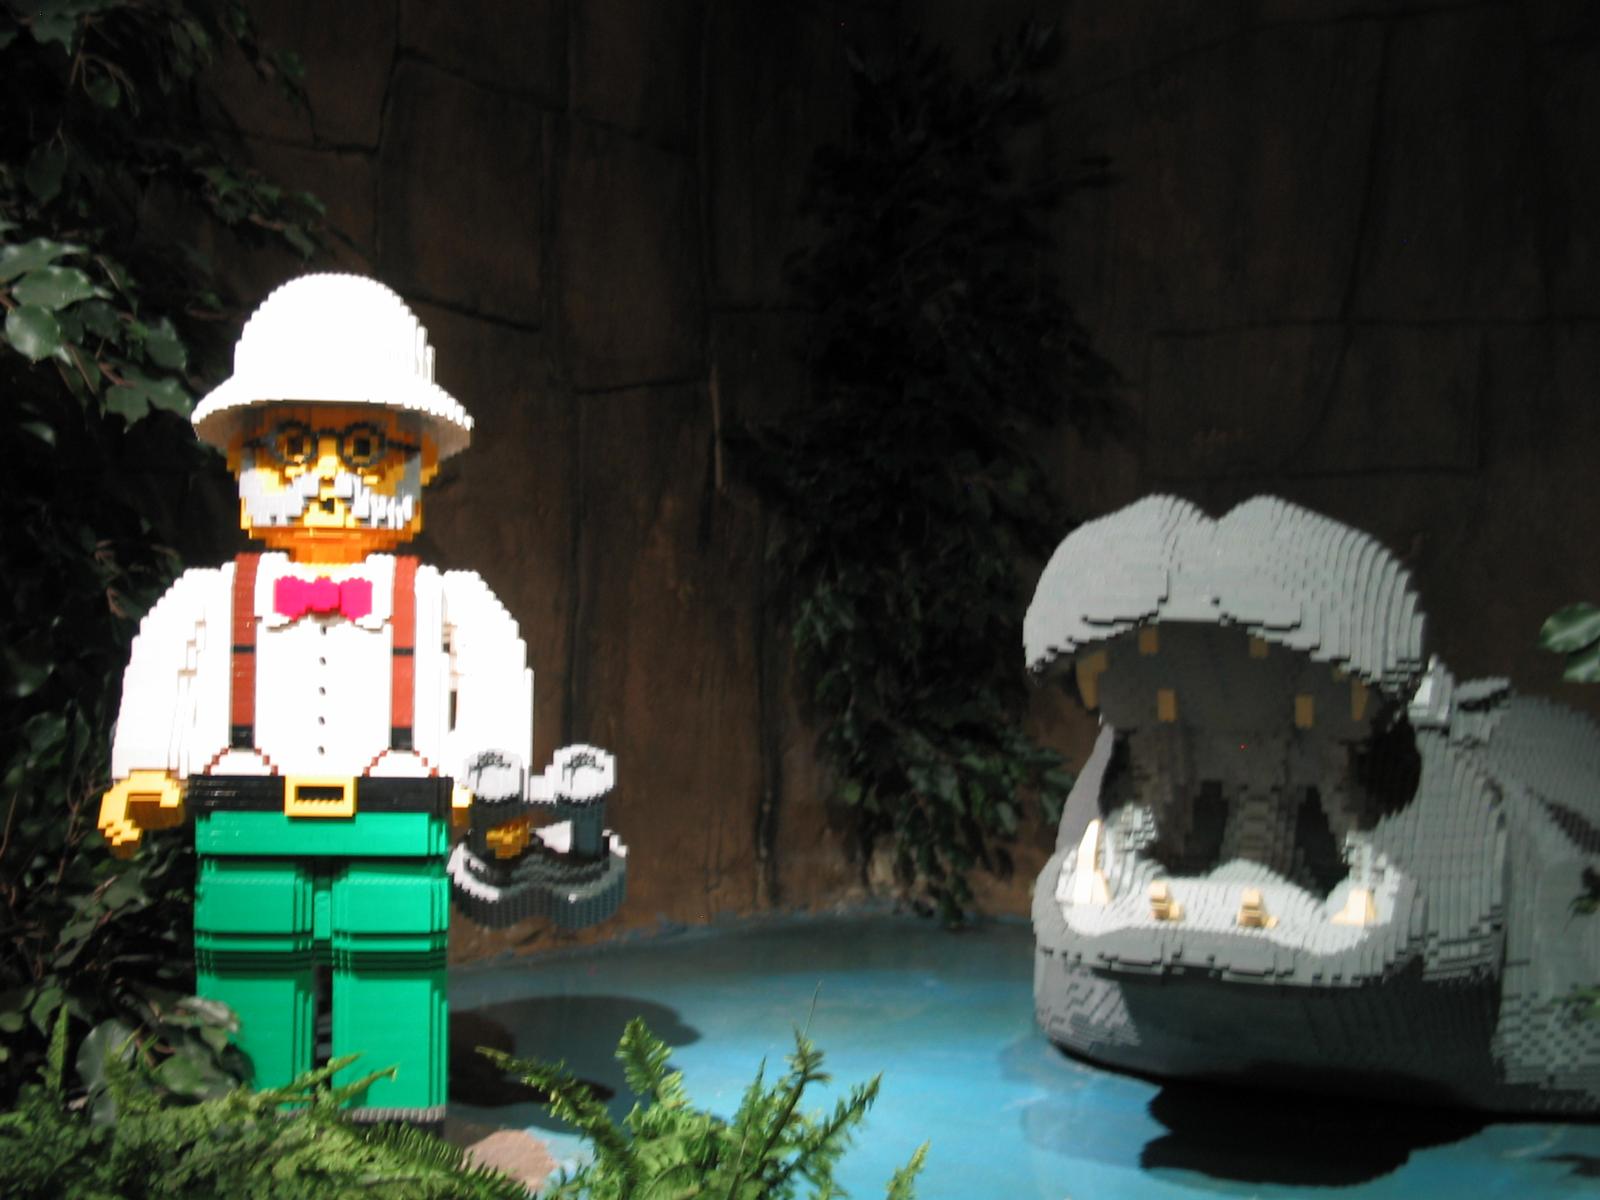 Lego man and Hippo